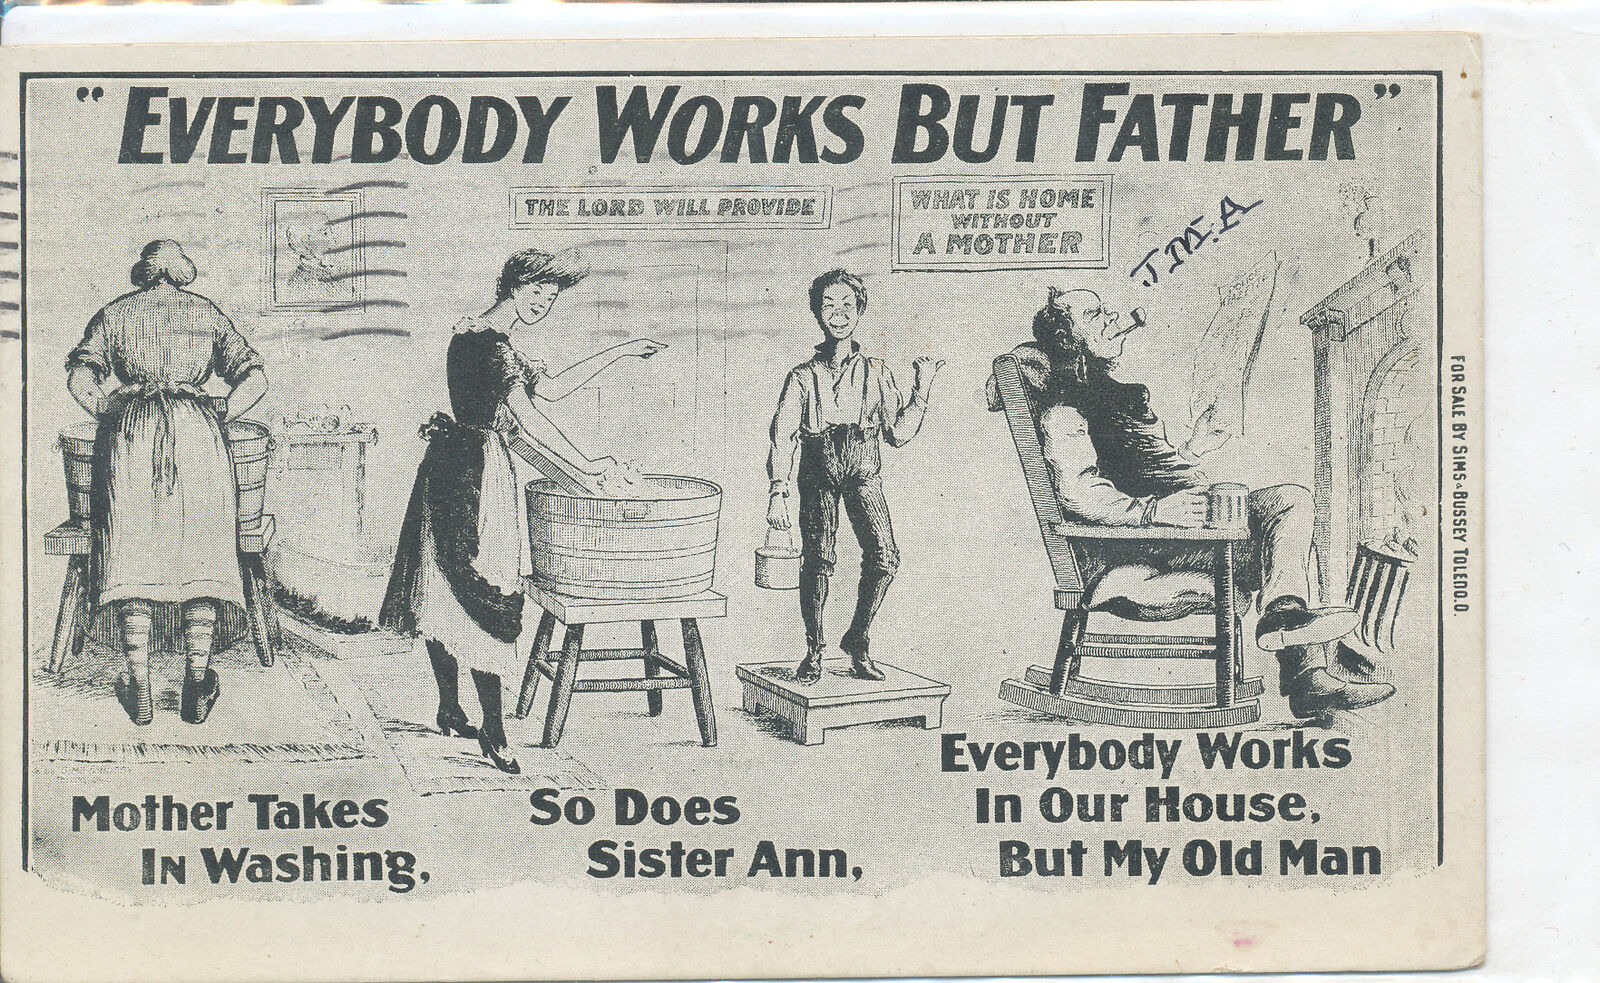 EVERYBODY WORKS IN OUR HOUSE BUT FATHER postcard